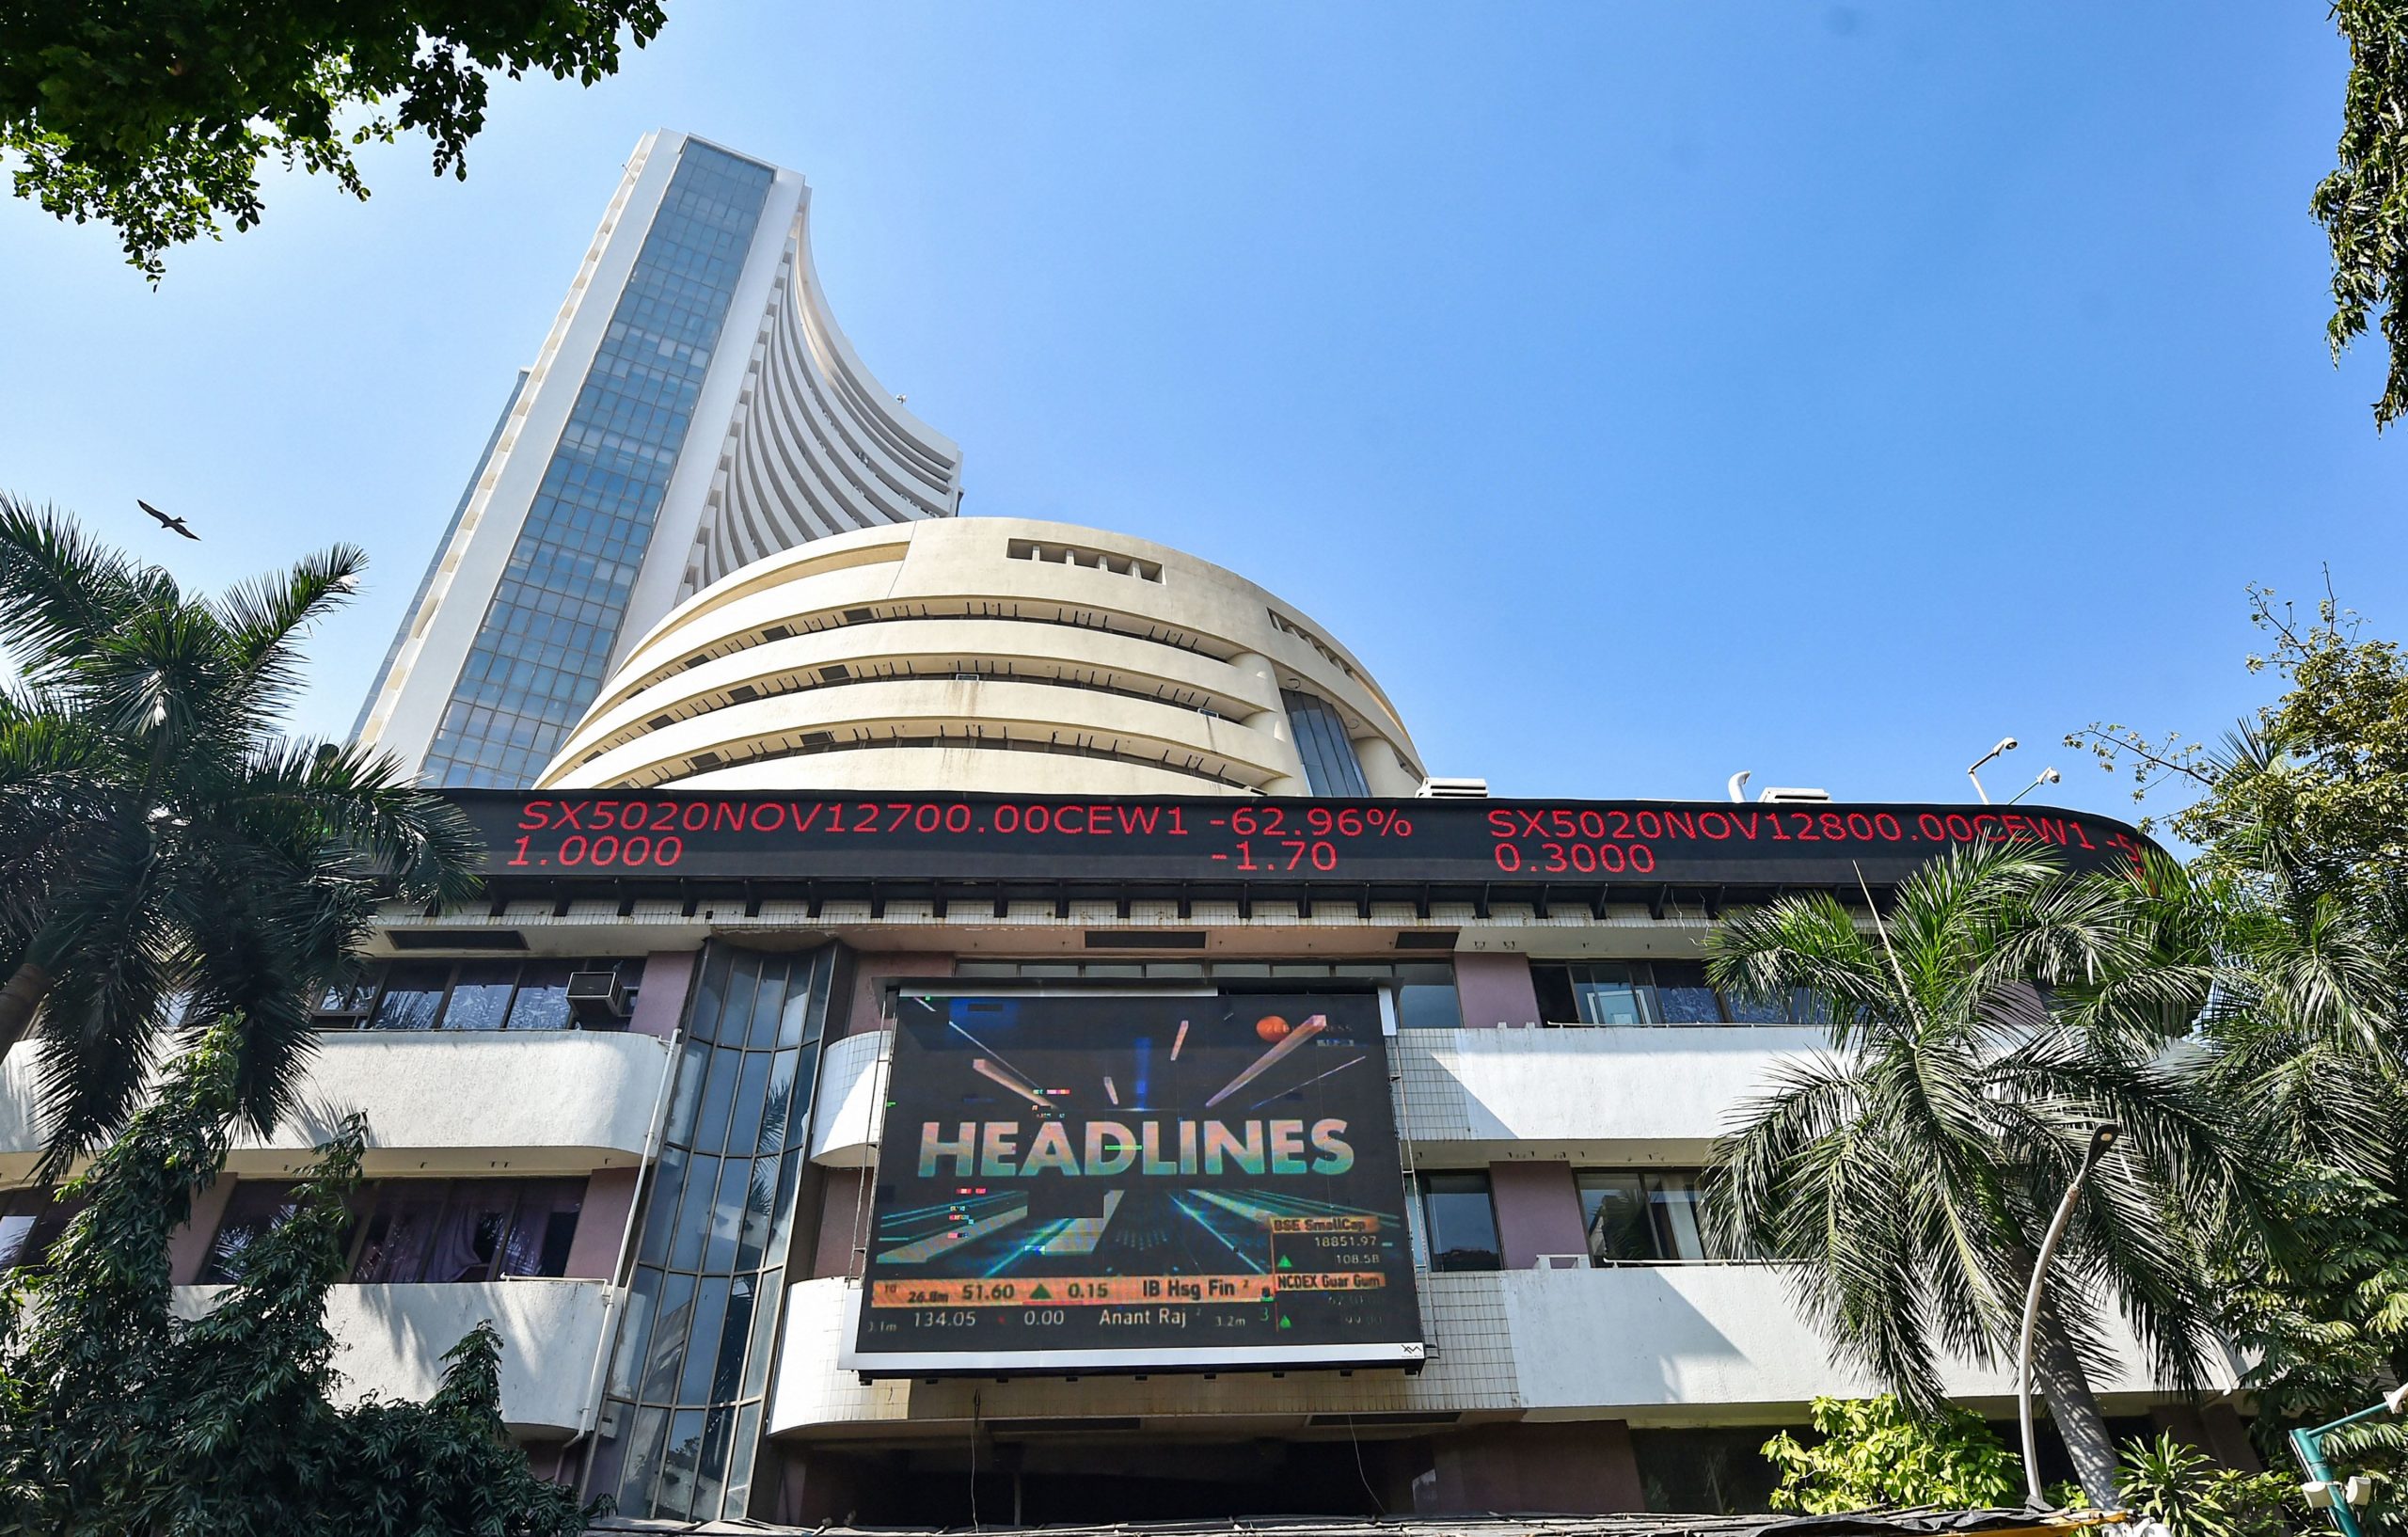 Trending Stocks: Future Retail, RIL, ICICI, Hindzinc and others in news today